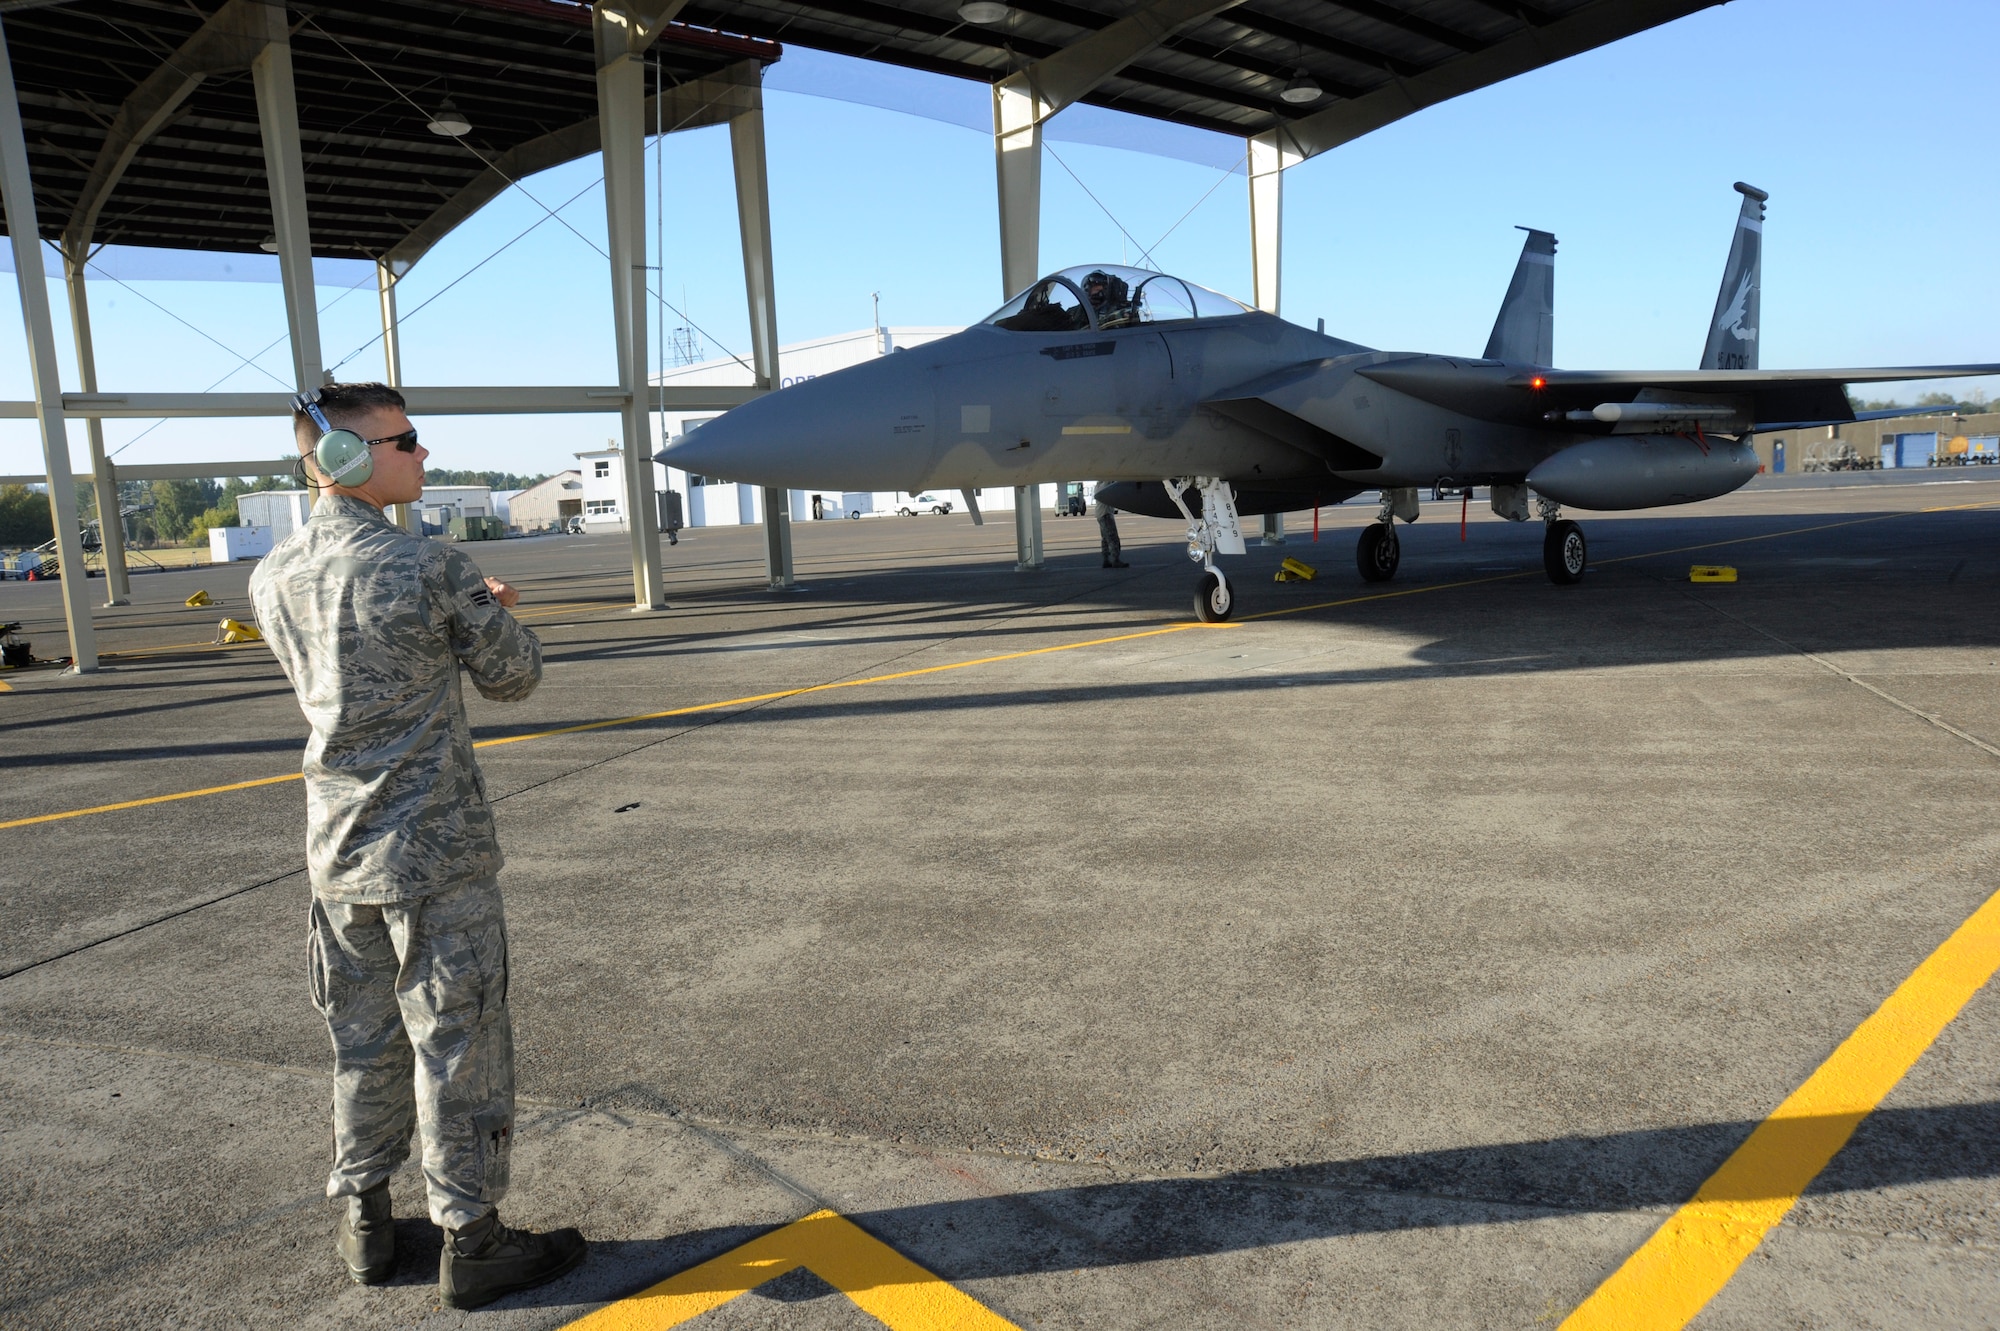 Senior Airman Adam Burger, assigned to the 142nd Fighter Wing Aircraft Maintenance Group, waits to marshal an F-15 Eagle to the flightline of the Portland Air National Guard Base, Ore., Sept. 4, 2014. (U.S. Air National Guard photo by Tech. Sgt. John Hughel, 142nd Fighter Wing Public Affairs/Released)